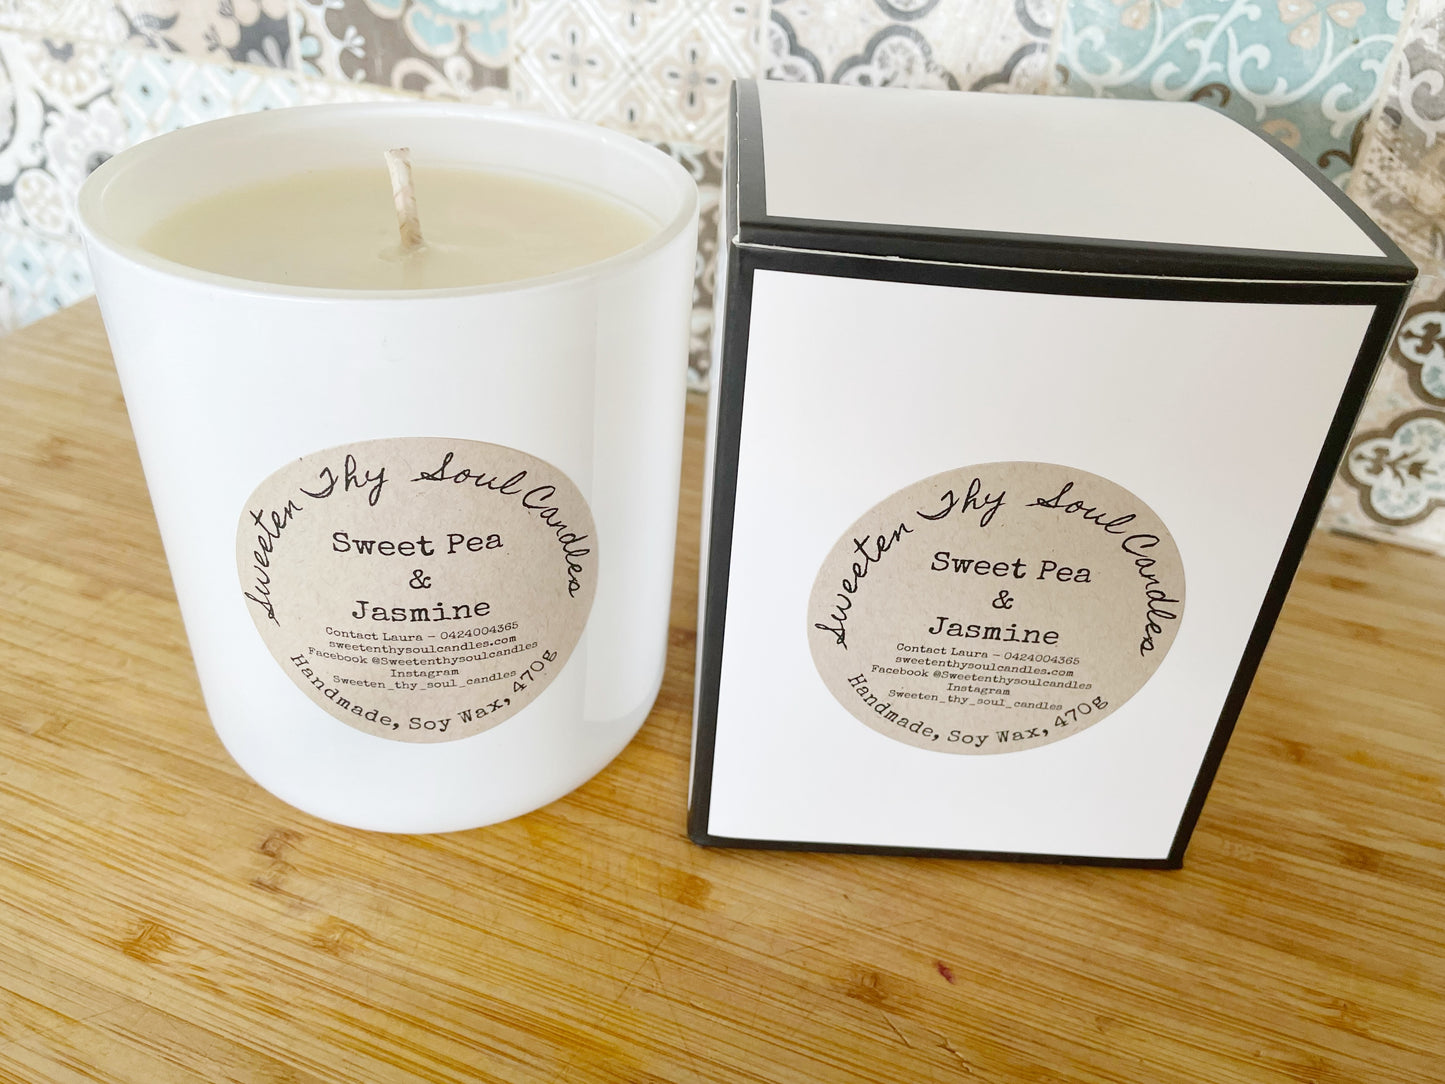 Sweet Pea and Jasmine 470g soy candle